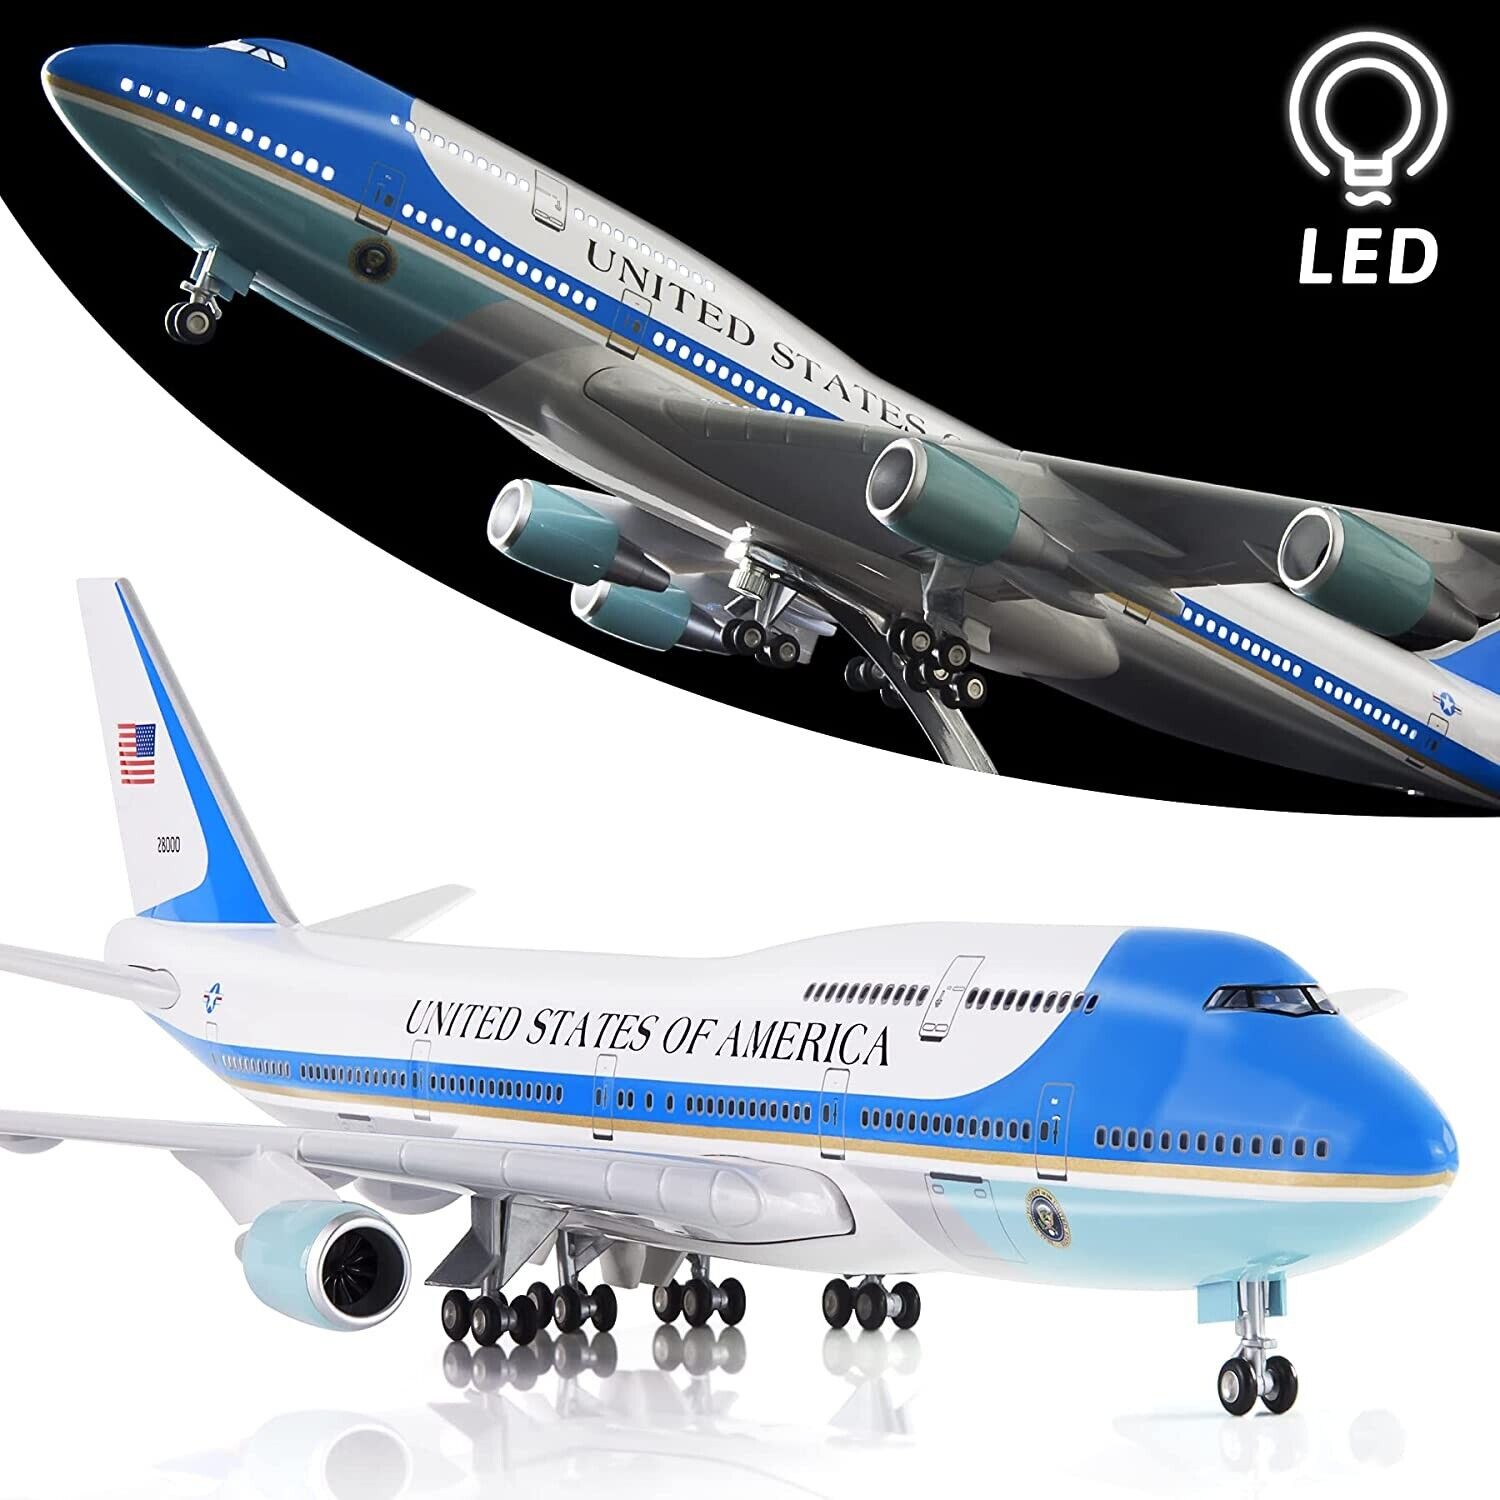 Air Force One - Large Boeing 747 - 1:130 Scale - High Quality with LED Lighting